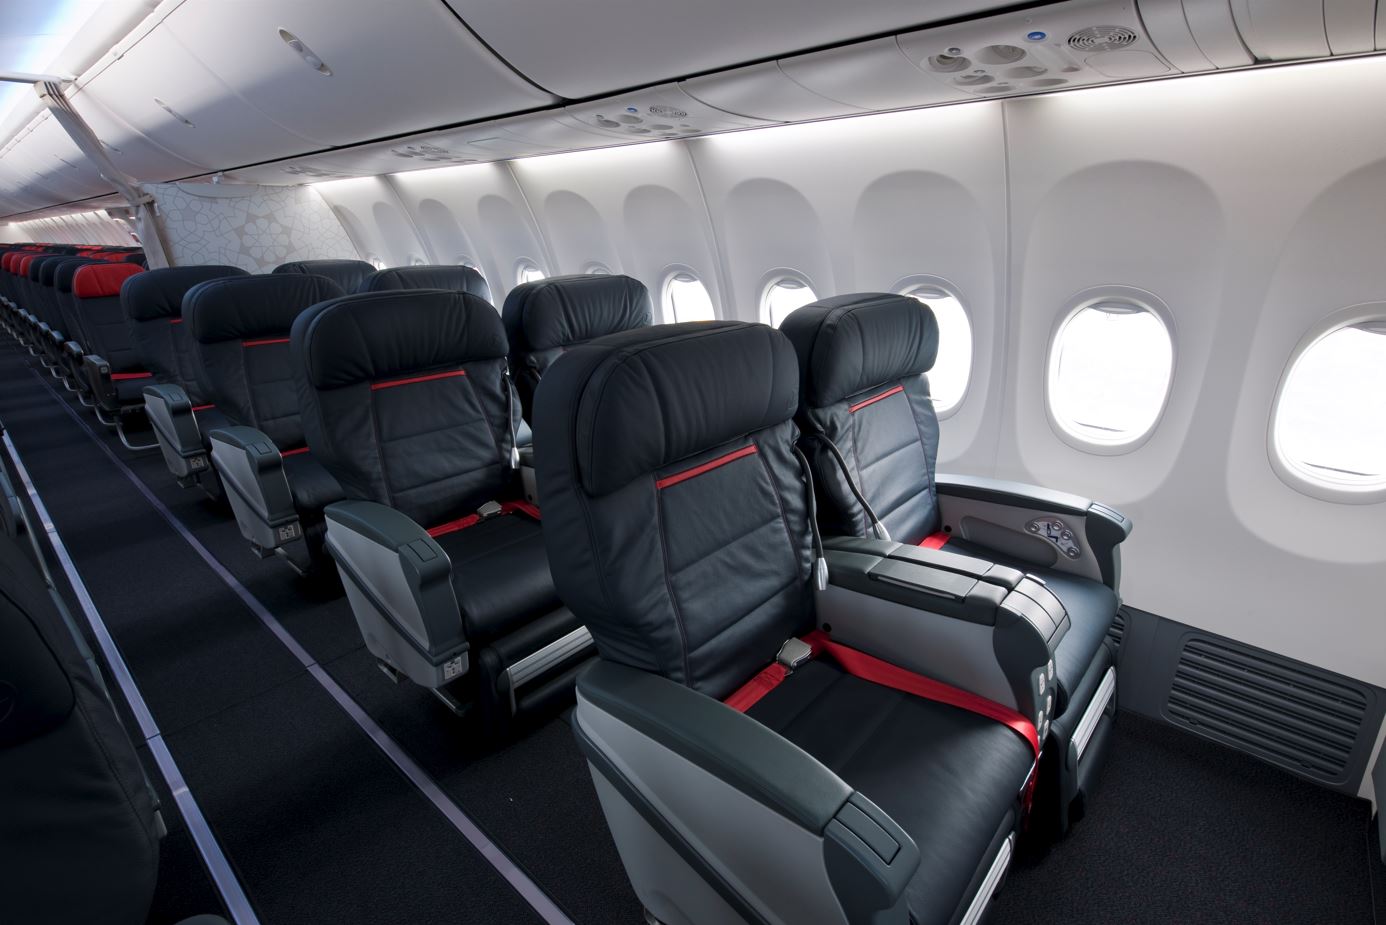 Turkish Airlines 737-800 Business Class